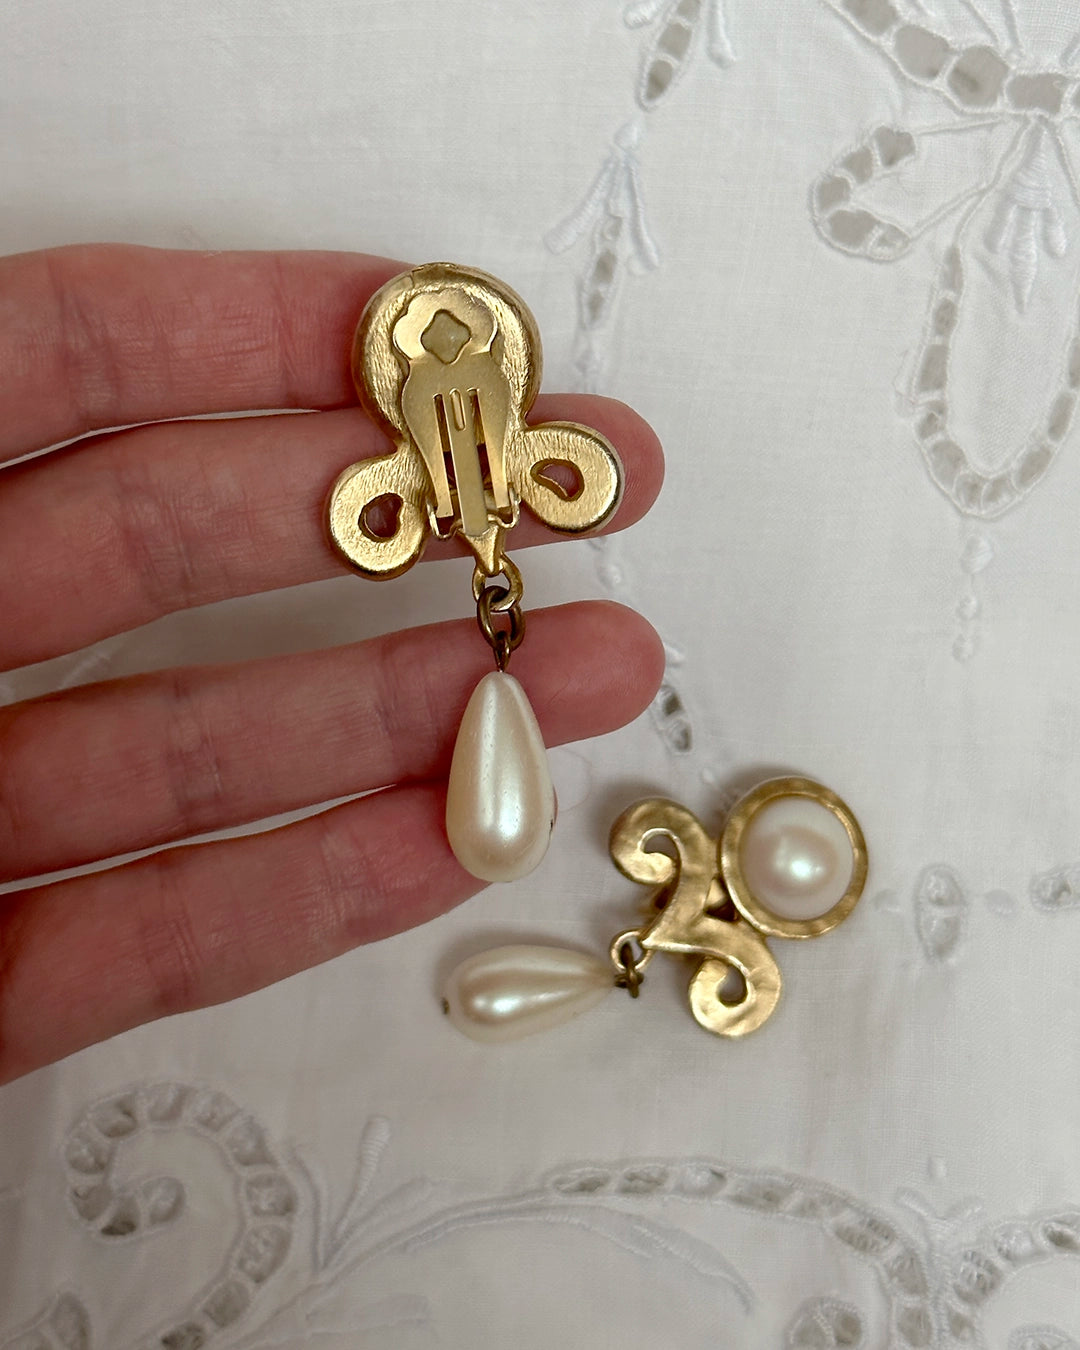 VINTAGE HAMMERED GOLD AND PEARL SURREALIST EARRINGS